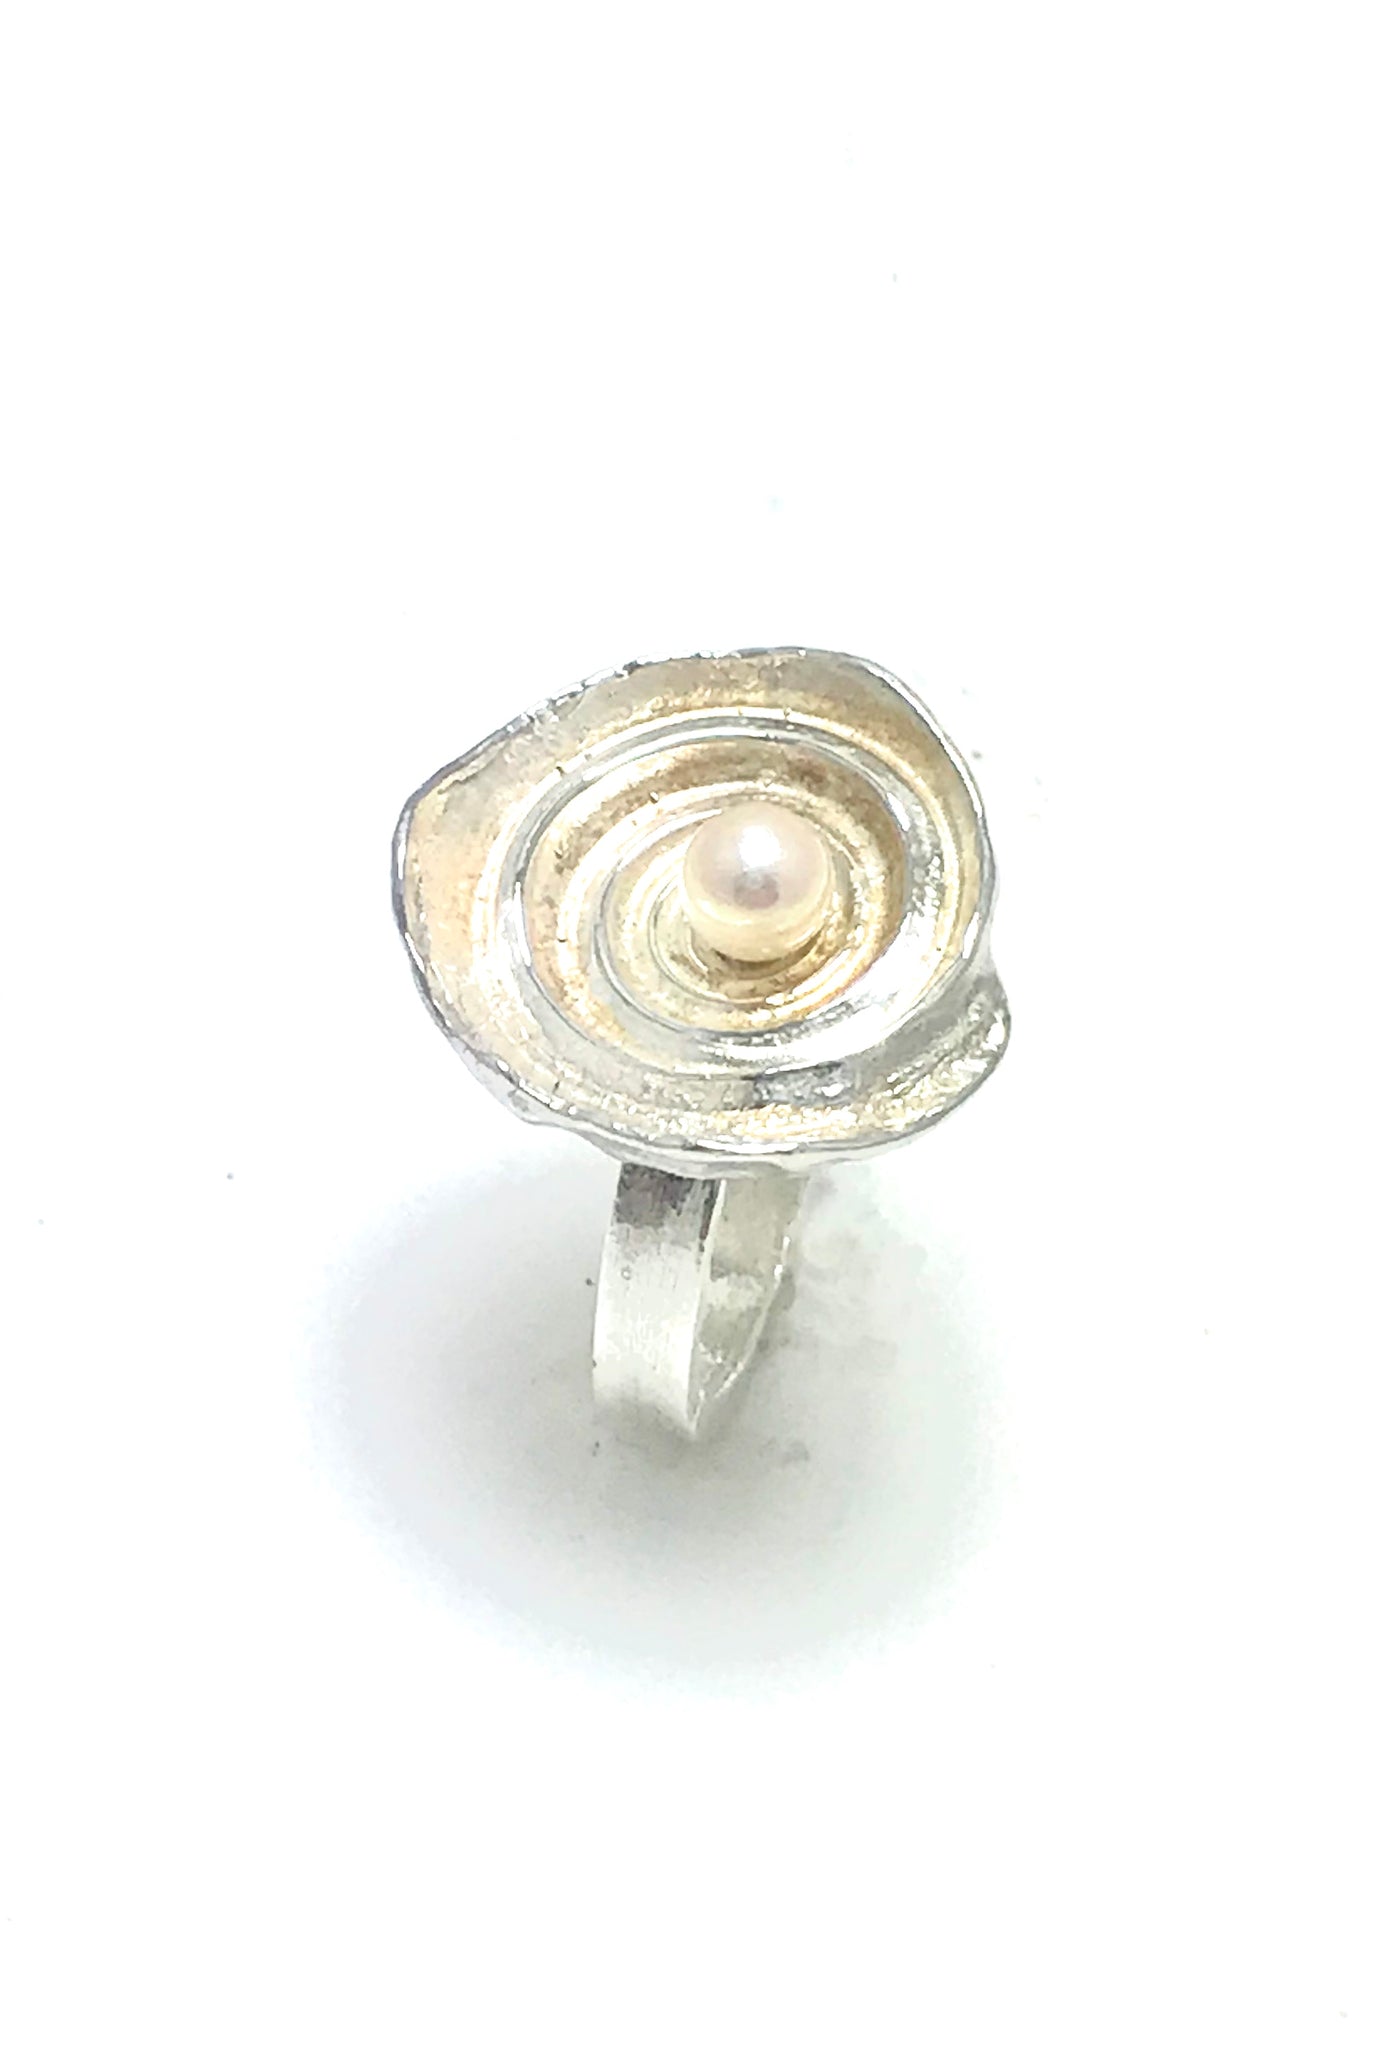 A ring made from a sea shell with the spiral cavities of the shell shining in sterling silver and a white pearl in the middle.